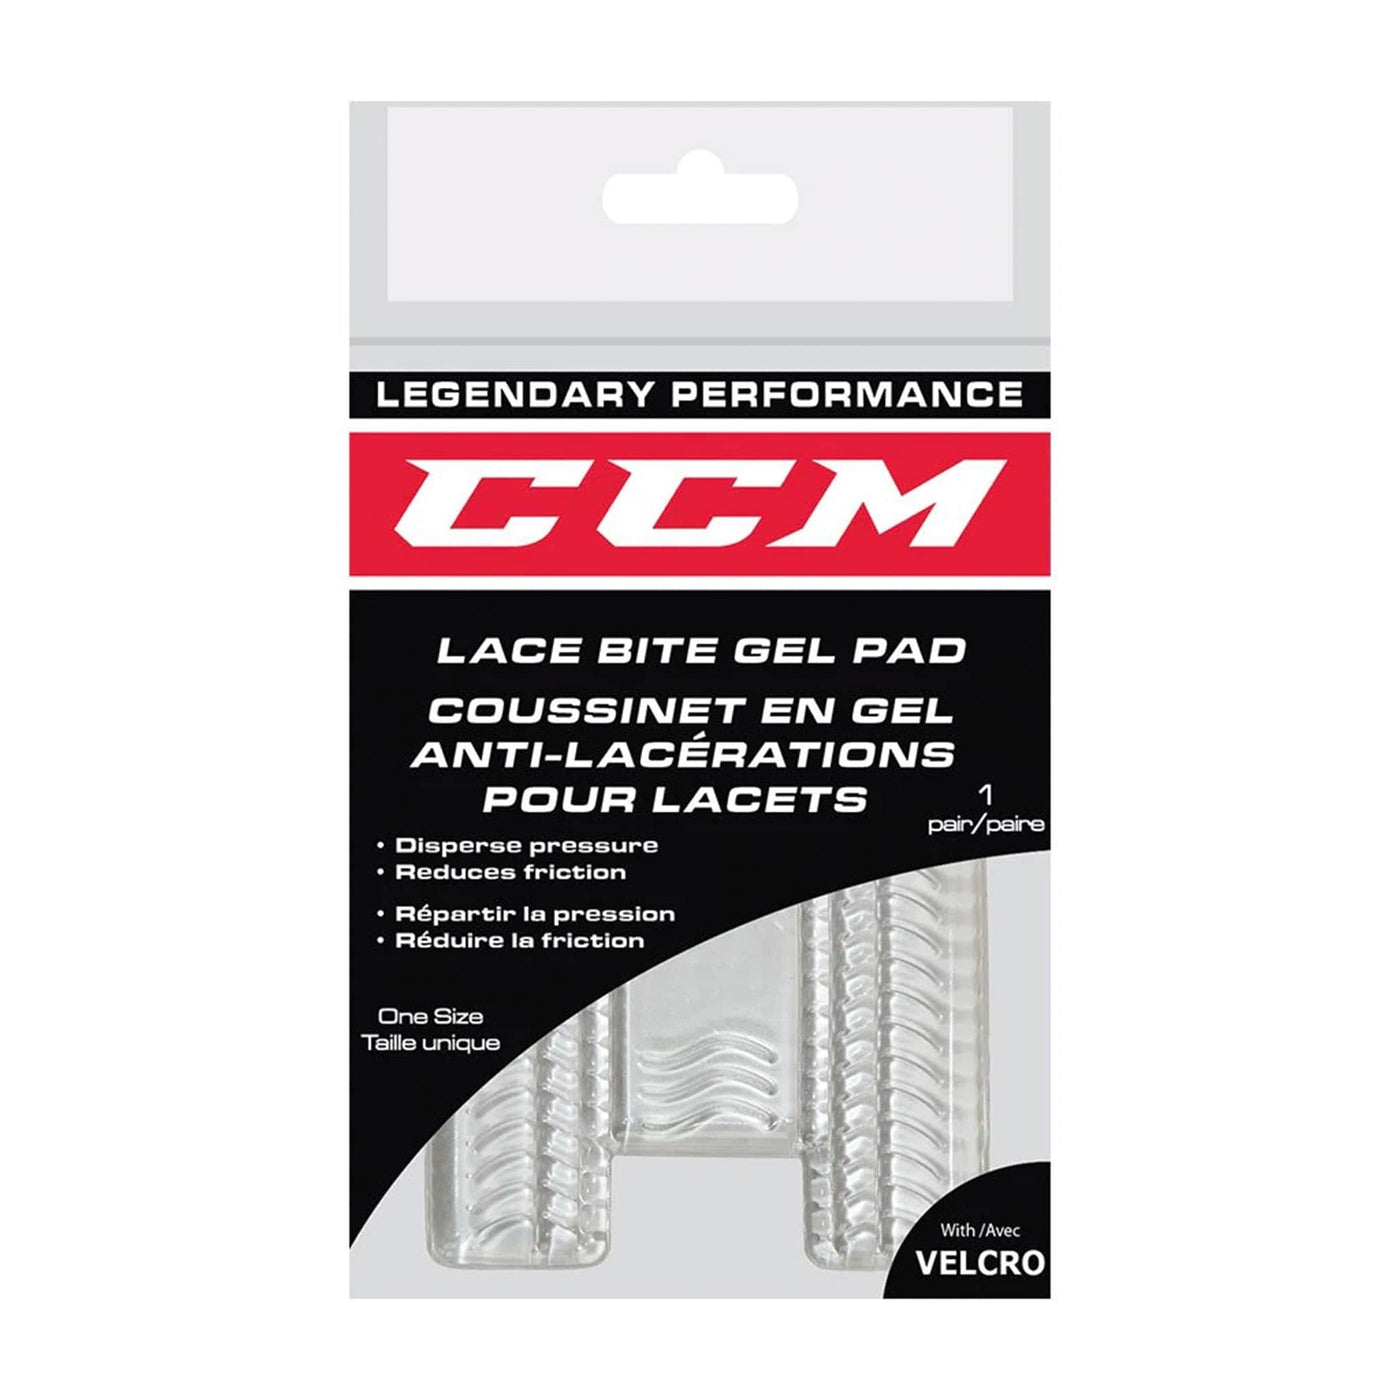 CCM Velcro Back Gel Pad Lace Bite Protector - The Hockey Shop Source For Sports